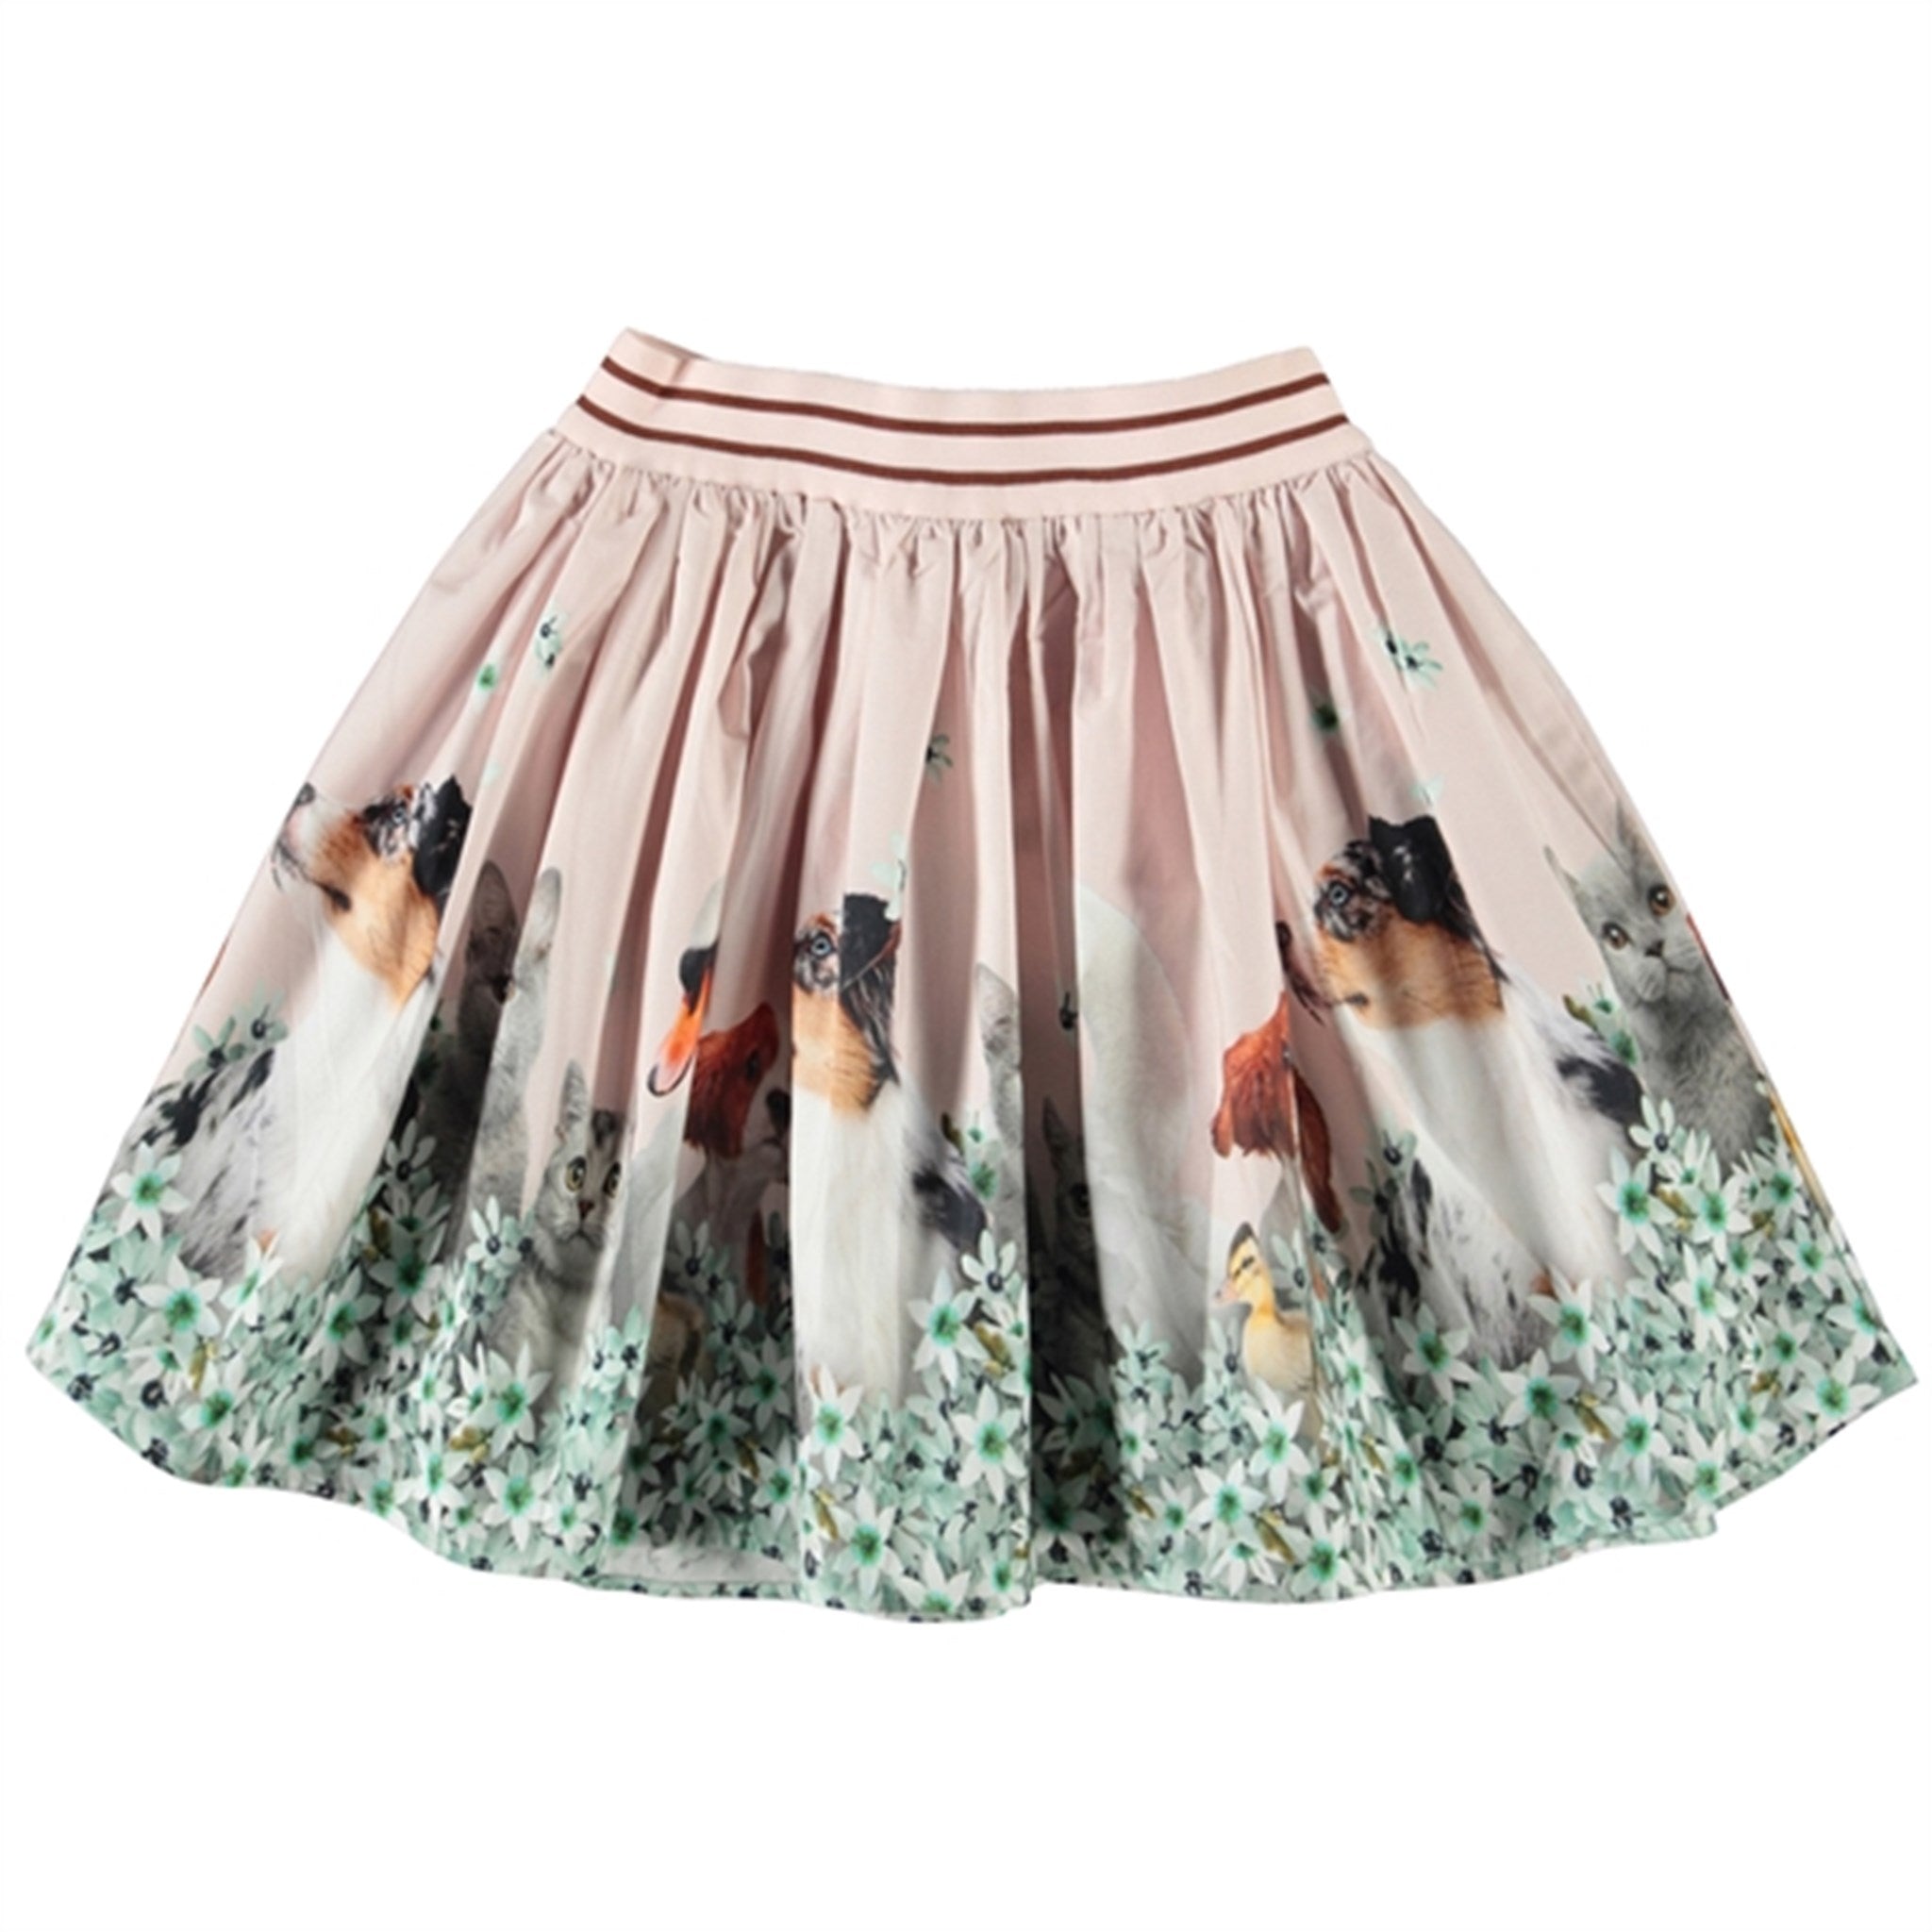 Molo Friends and Flowers Brenda Skirt